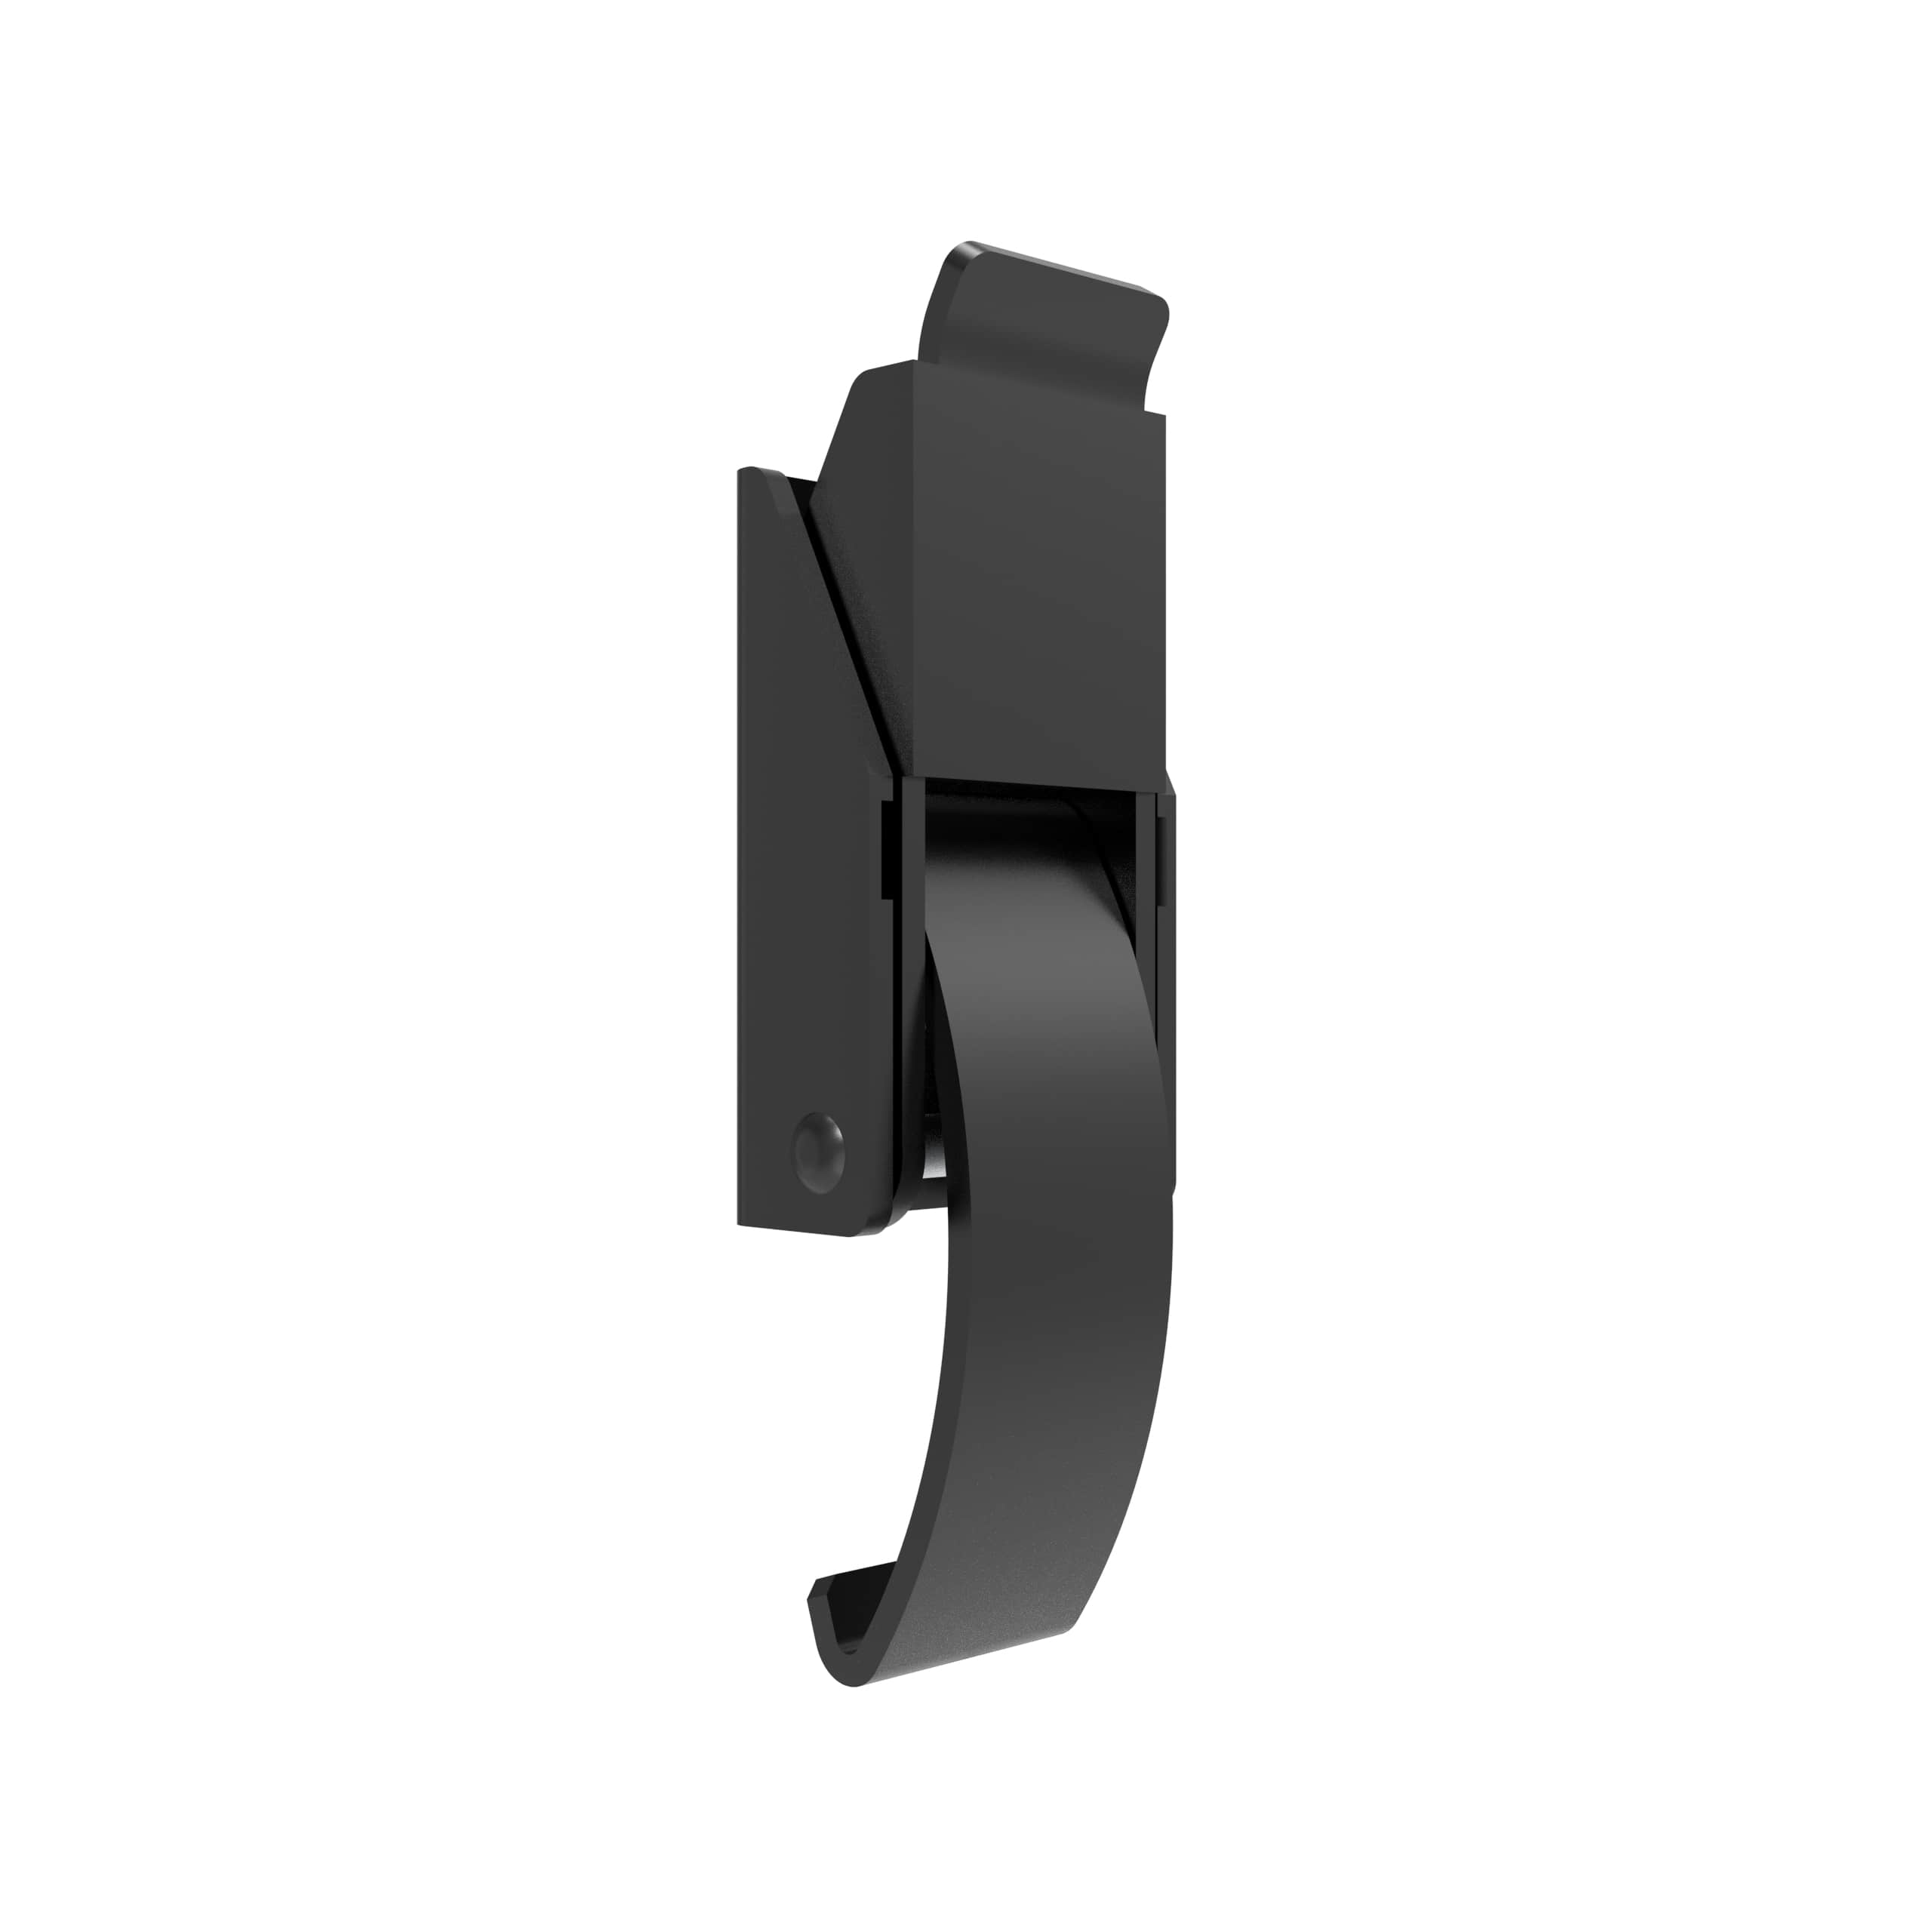 F-1641-15-40 | Over-center Draw Latch Small Size, Handle Tab Up,Short connection,non-padlockable , Stainless Steel, Powder coating, black